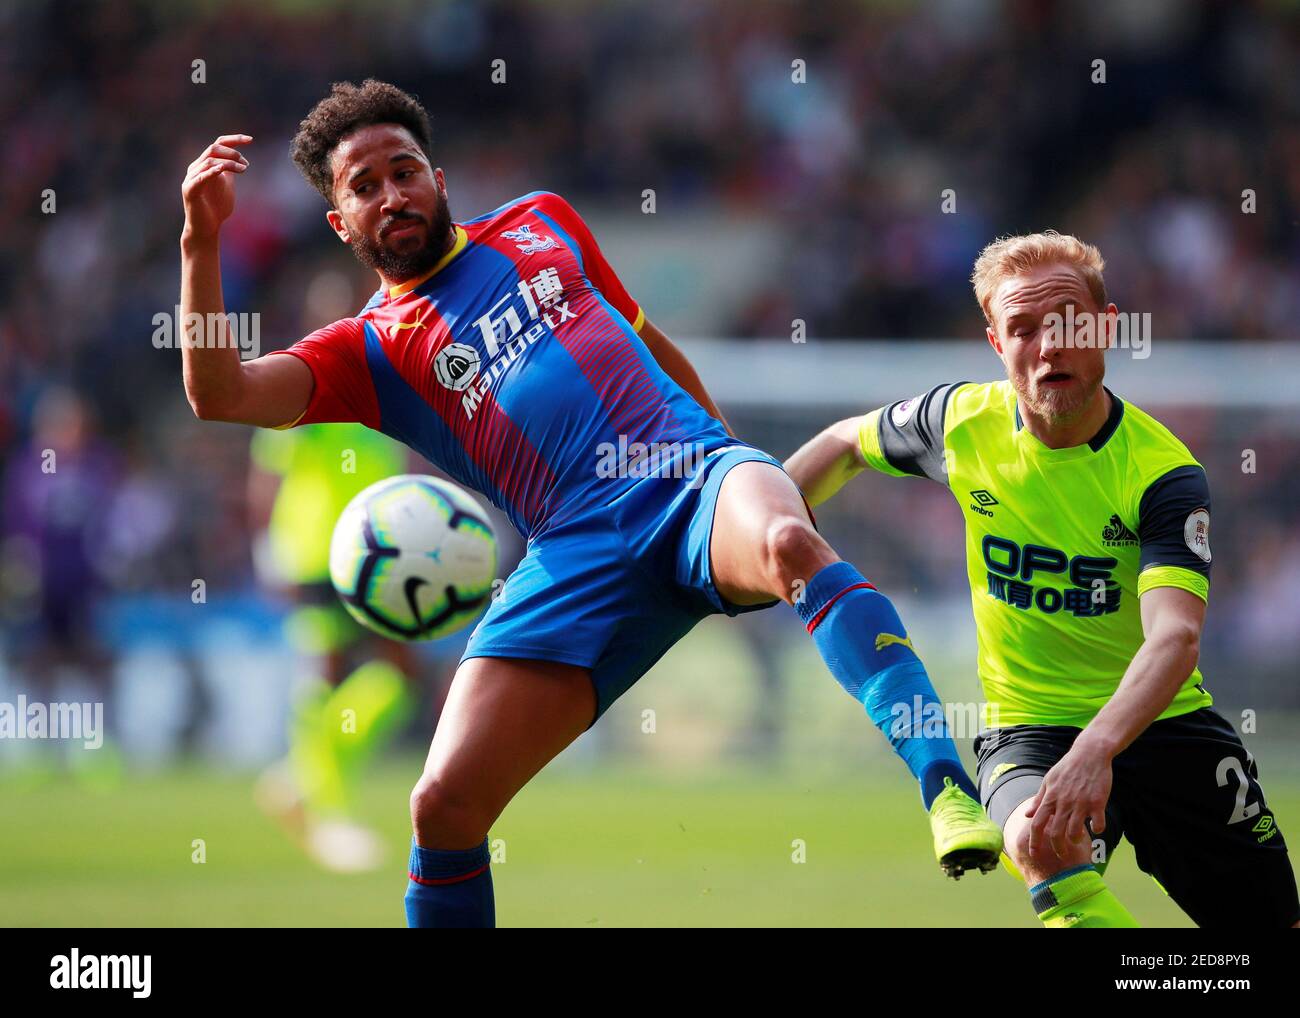 Soccer Football - Premier League - Crystal Palace v Huddersfield Town - Selhurst Park, London, Britain - March 30, 2019  Crystal Palace's Andros Townsend in action with Huddersfield Town's Alex Pritchard      Action Images via Reuters/Andrew Couldridge  EDITORIAL USE ONLY. No use with unauthorized audio, video, data, fixture lists, club/league logos or 'live' services. Online in-match use limited to 75 images, no video emulation. No use in betting, games or single club/league/player publications.  Please contact your account representative for further details. Stock Photo